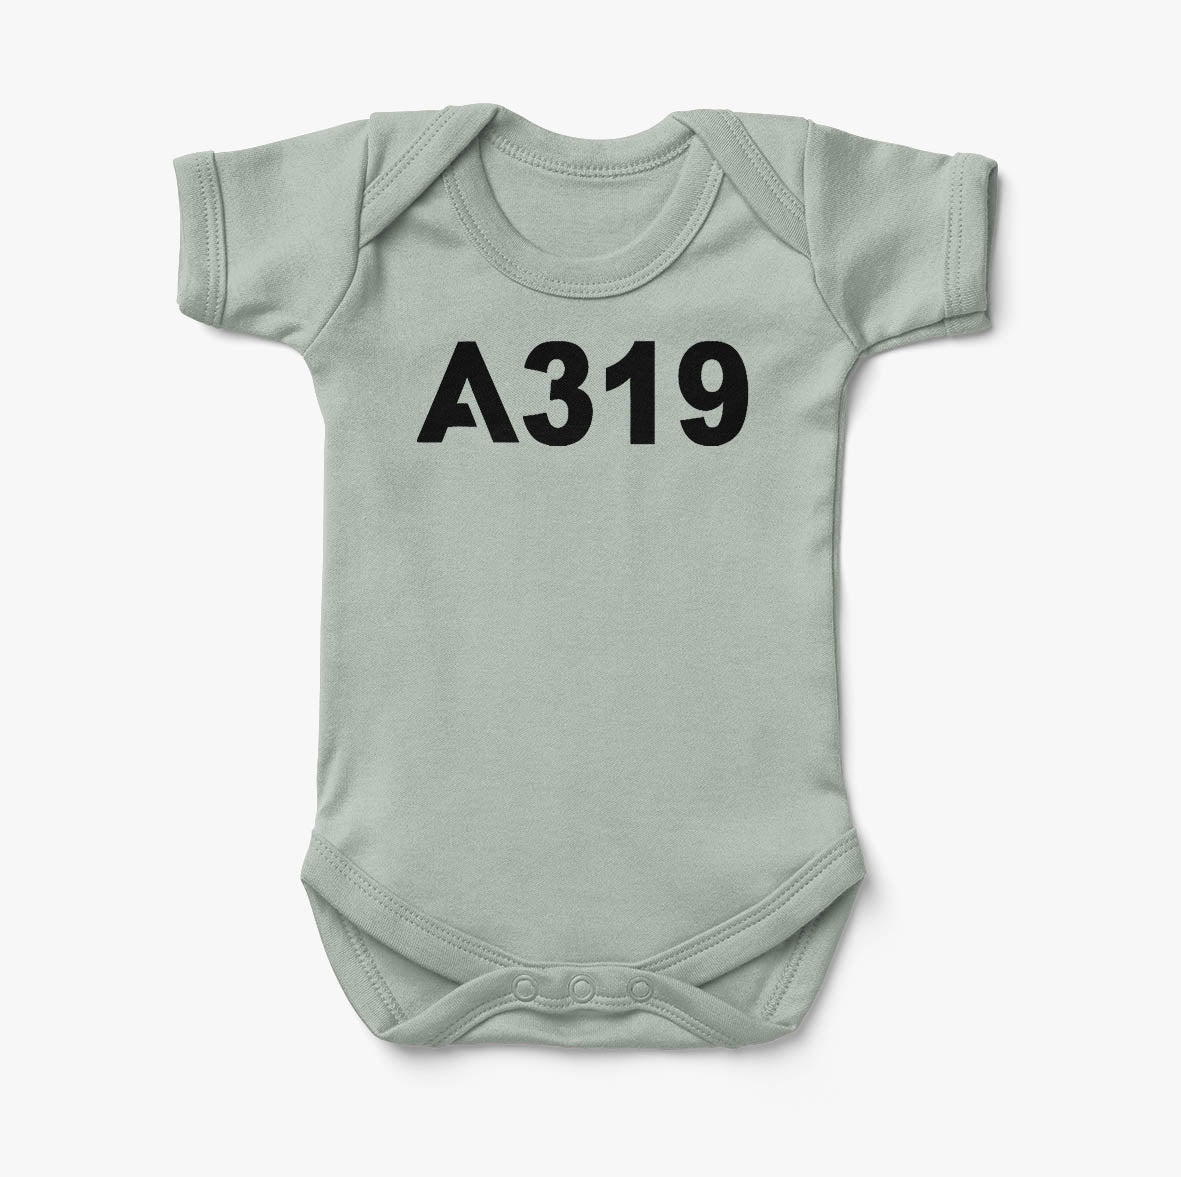 A319 Flat Text Designed Baby Bodysuits